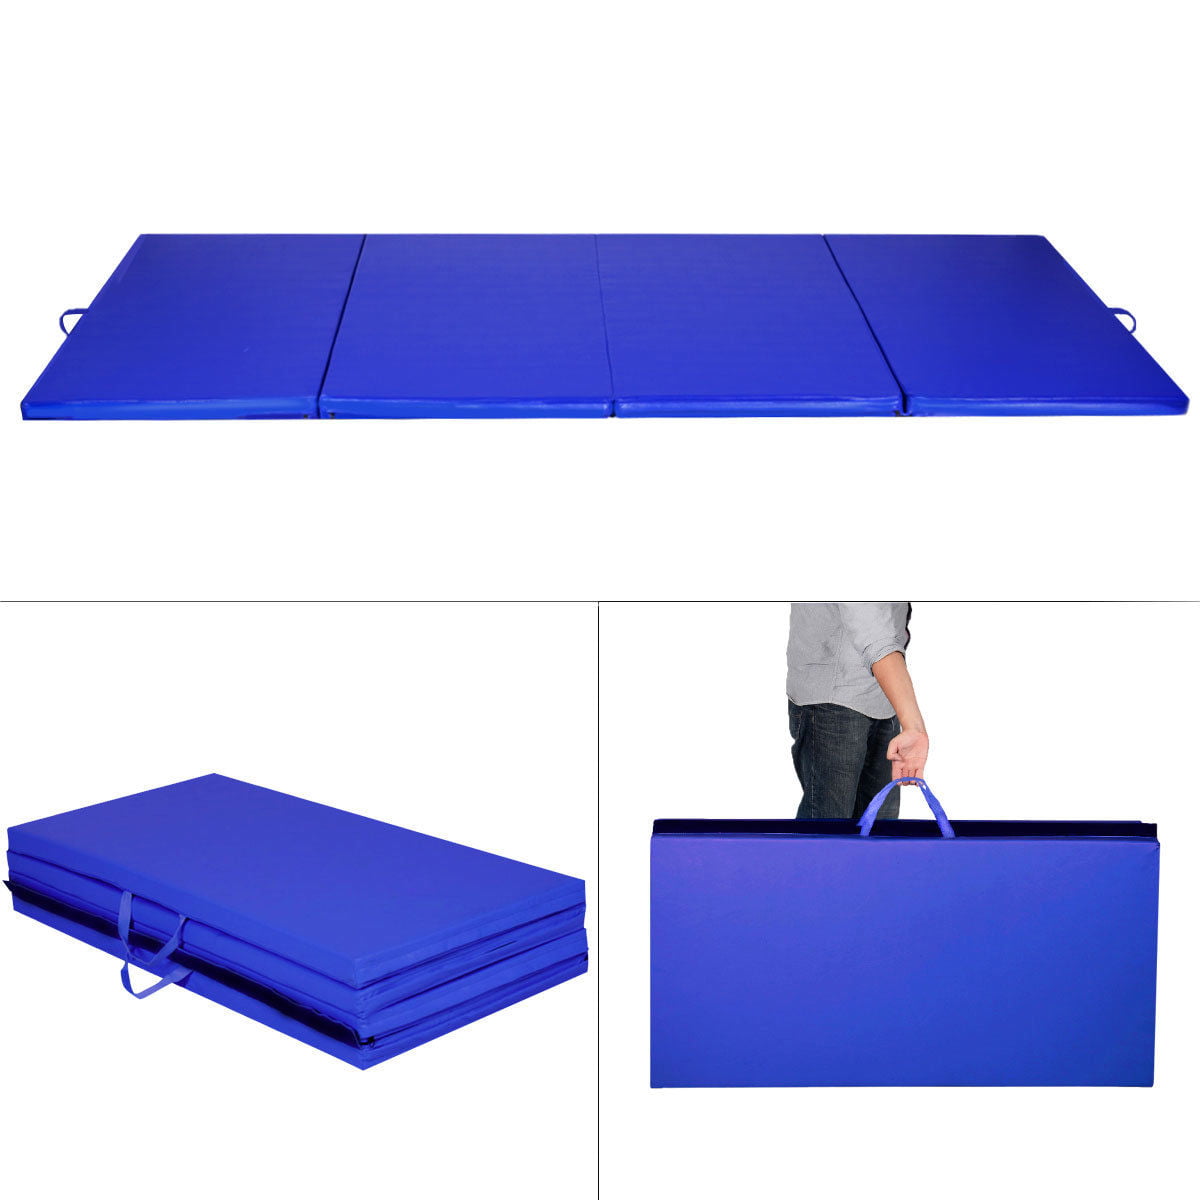 HCY Exercise Mat Gymnastics Mat Tumbling Mat 4'x8'x2 Pu Leather with Carrying Handles for Yoga,Home Gym,Core Workouts,Stretching 